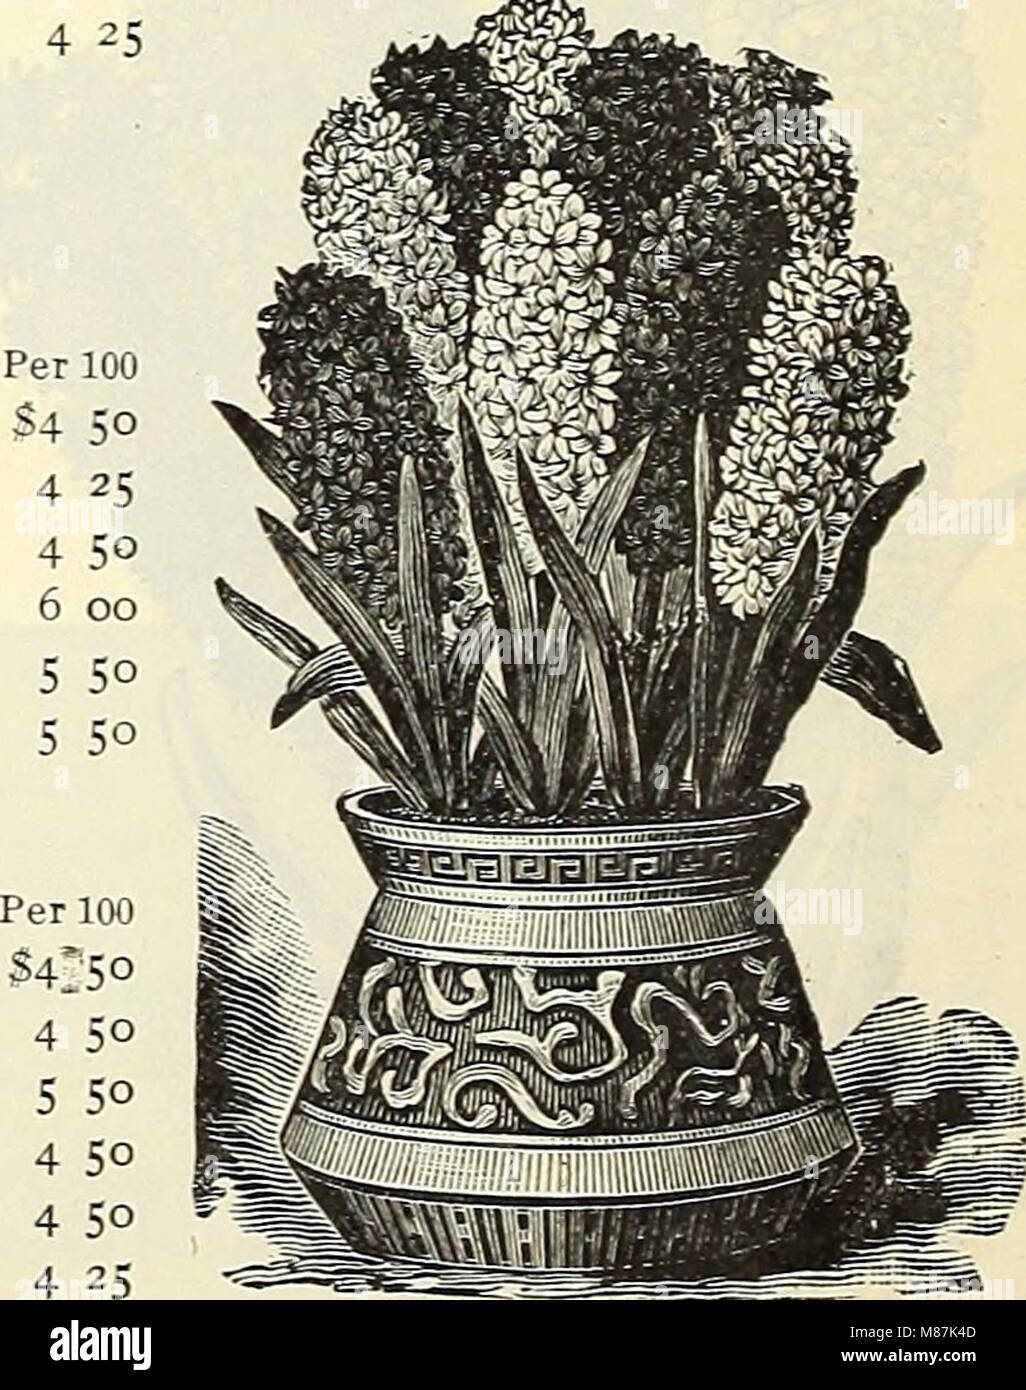 Dreer's wholesale price list - bulbs plants flower seeds, vegetable seeds, grass seeds, fertilizers, insecticides, tools, etc (1903) (20867677738) Stock Photo